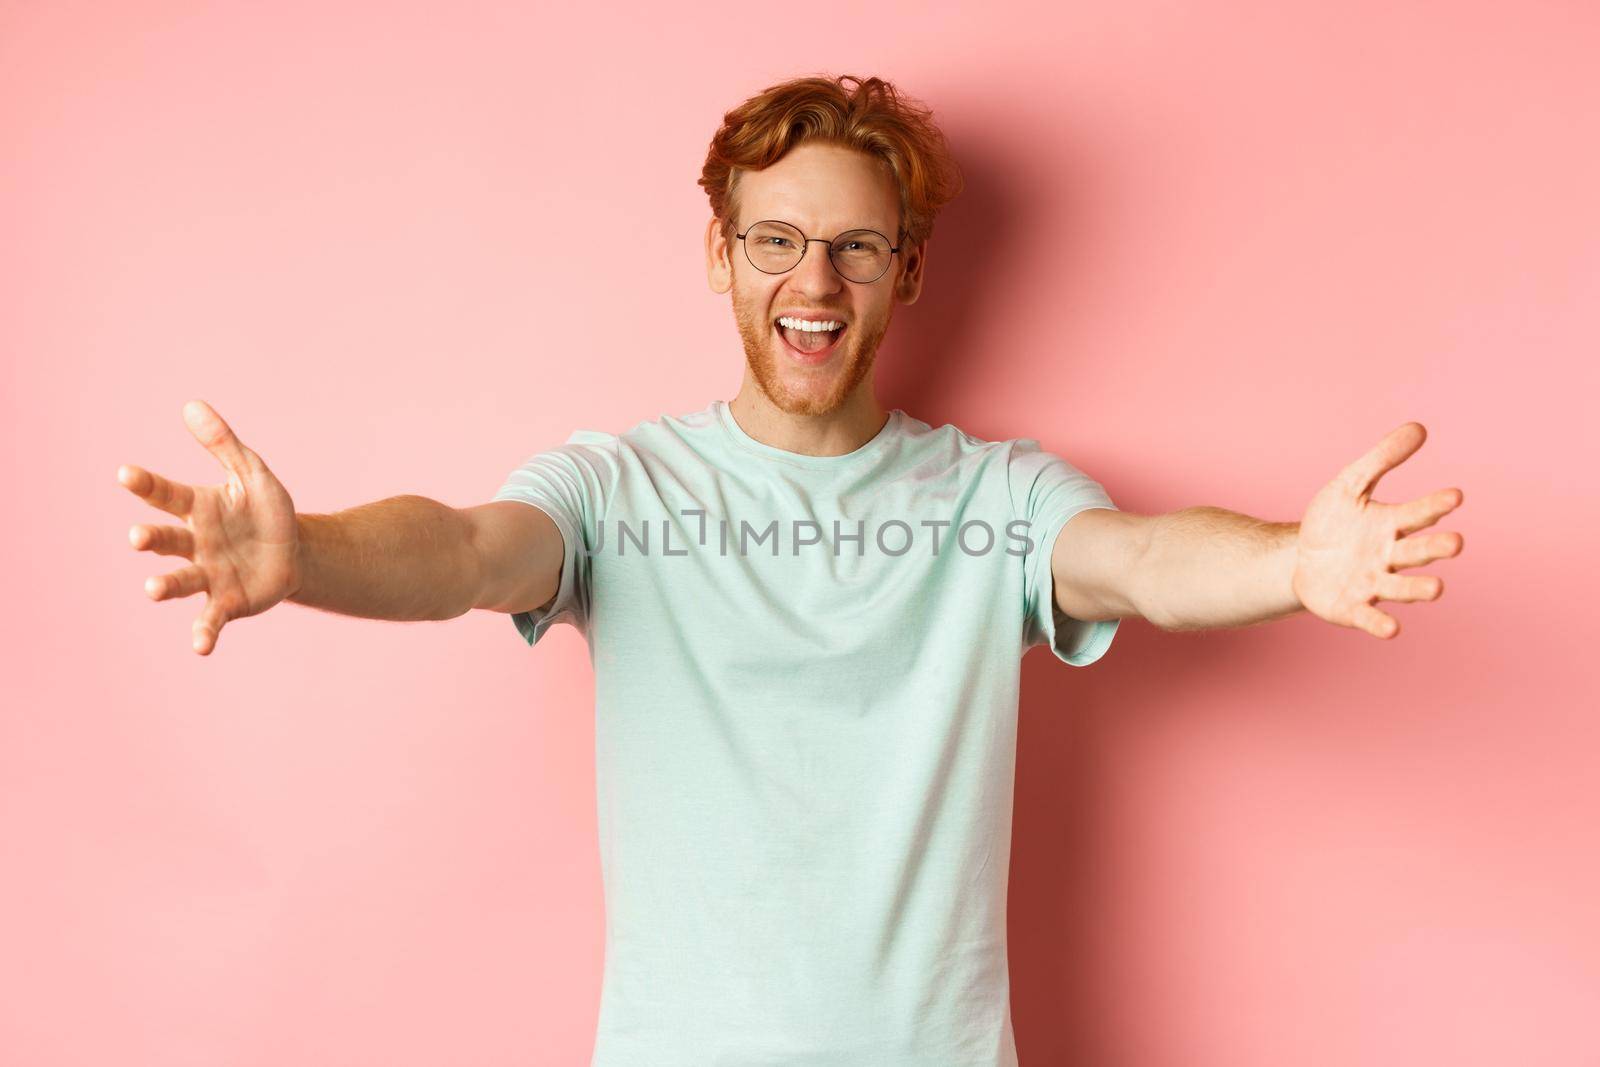 Young friendly man with red hair and beard reaching hands for hug, stretch out arm in warm welcome, smiling happily, standing over pink background.